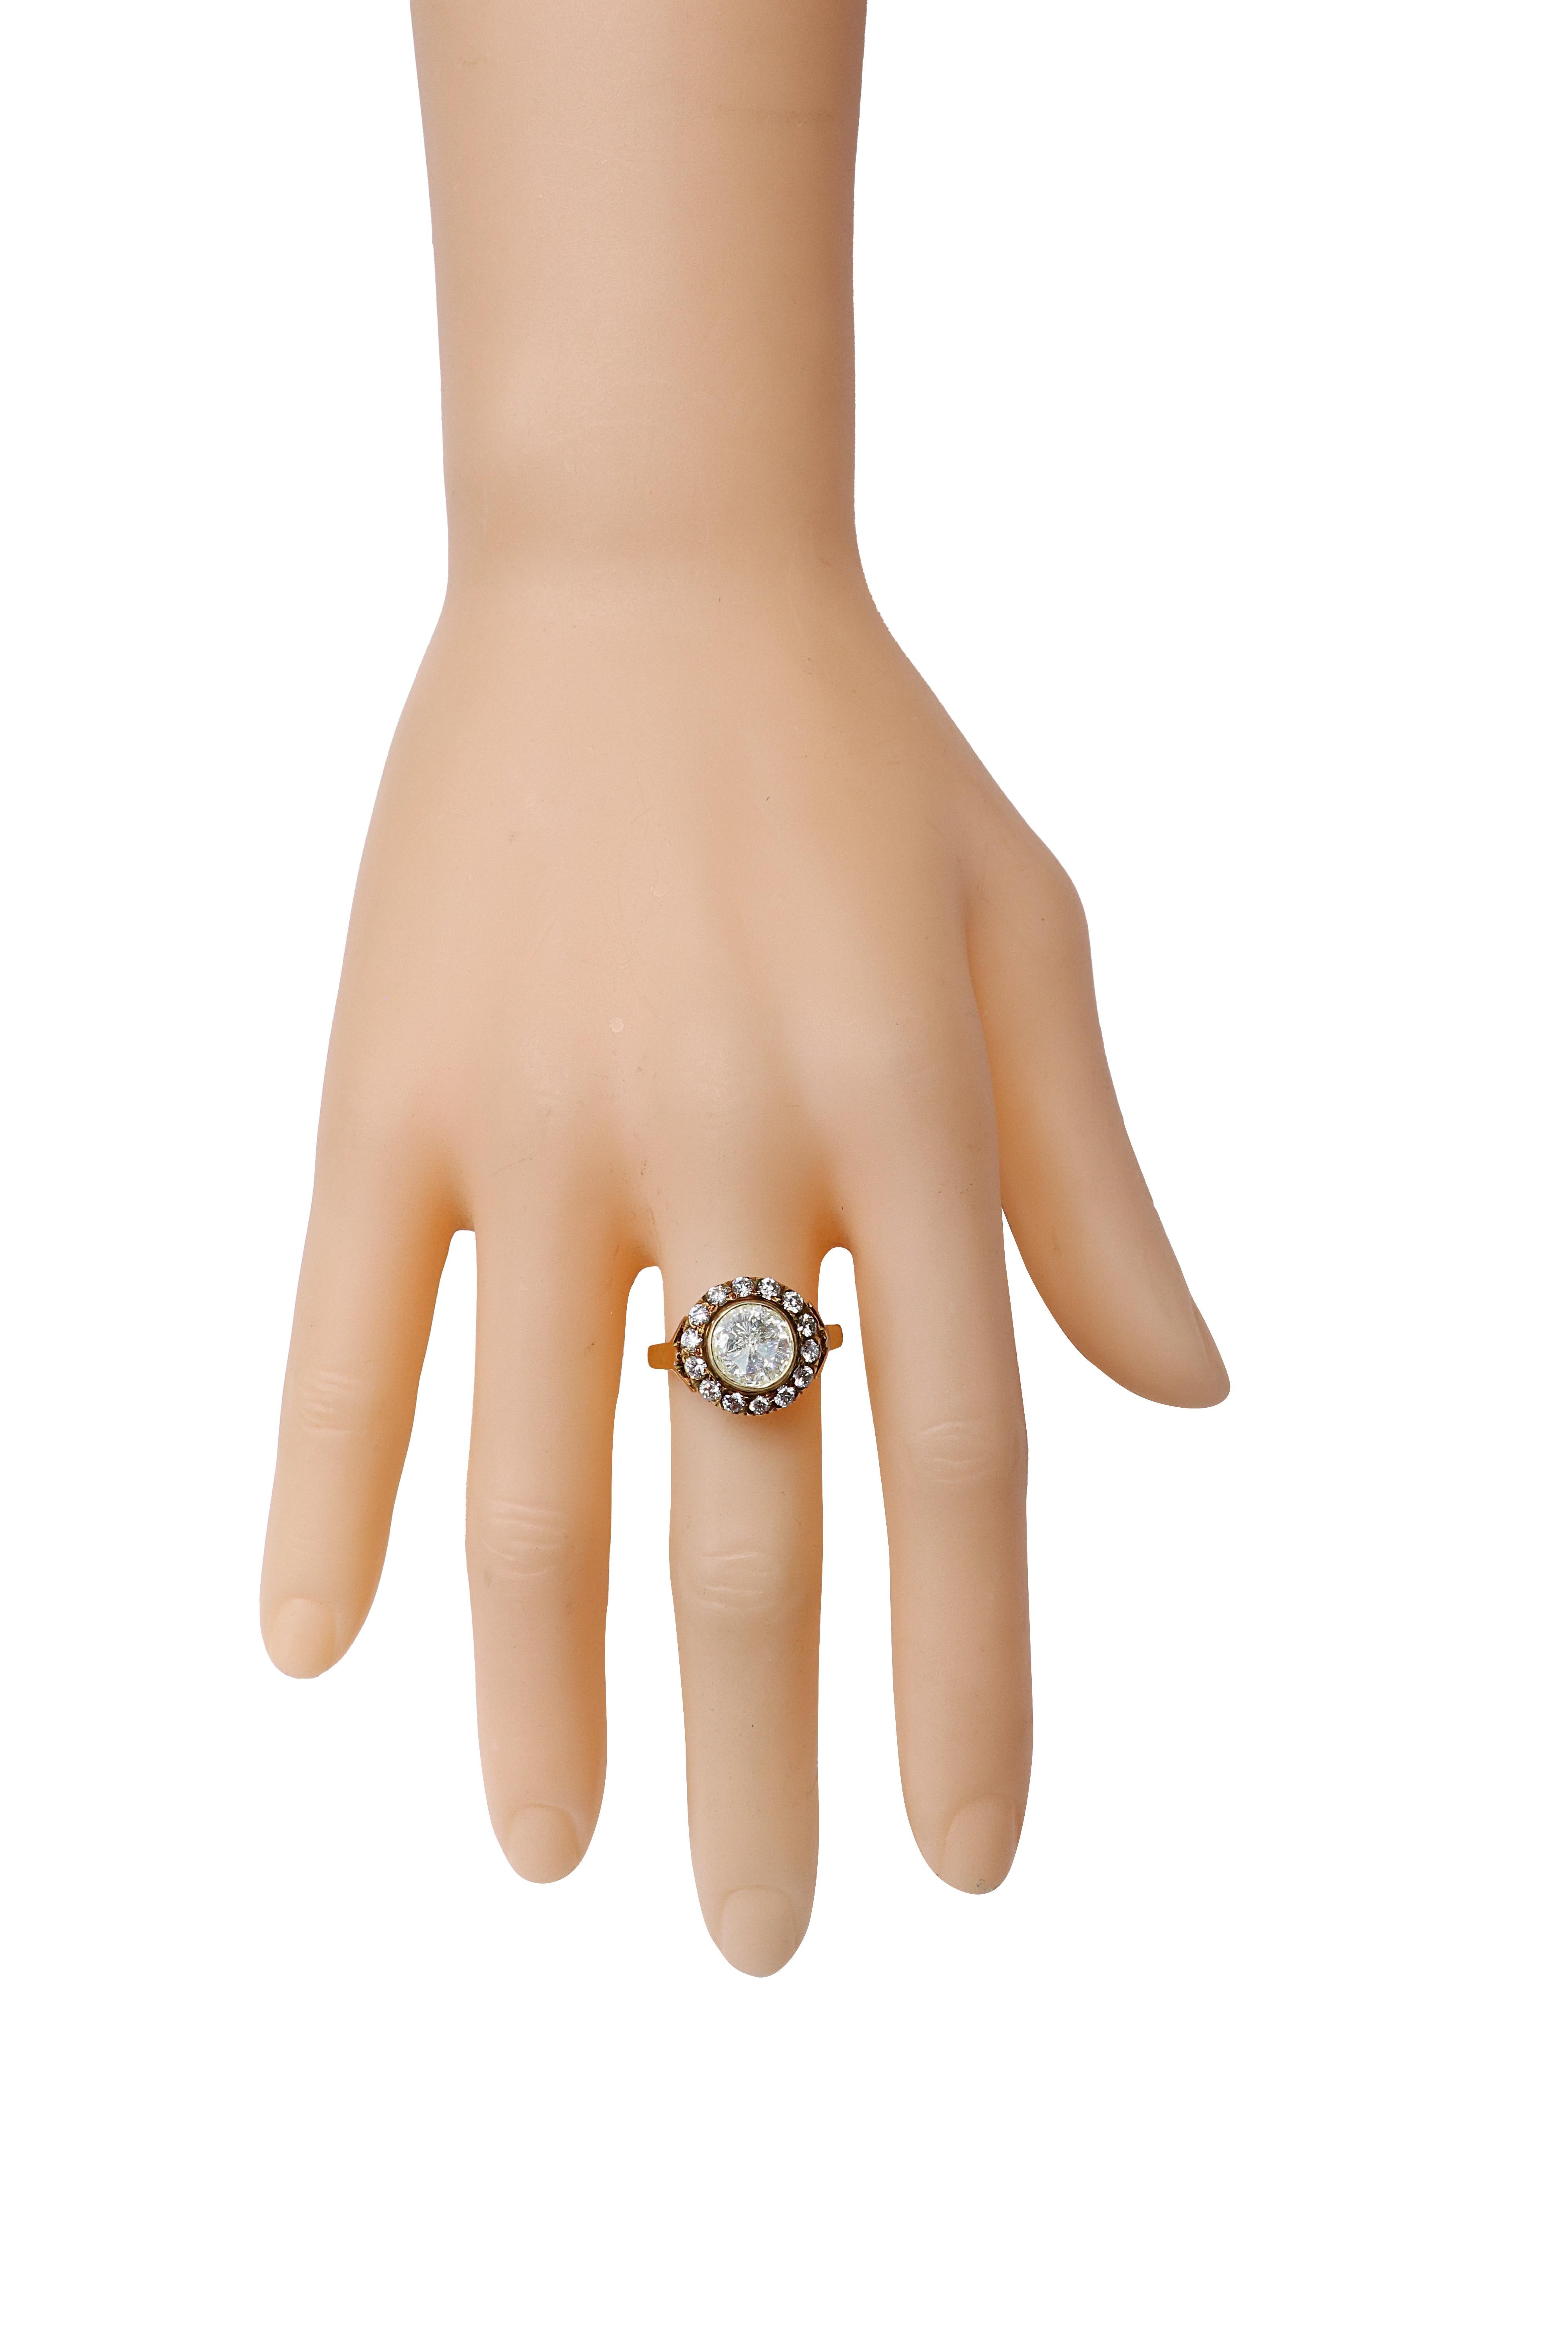 18 Karat Gold 1.22 Carat Diamond Art-Deco Style Ring

Keep it simple, keep it classic. Flaunt your style quotient with this timeless and classic, diamond round-cut ring. This opulent ring is crafted in a decent and dazzling design that is neither